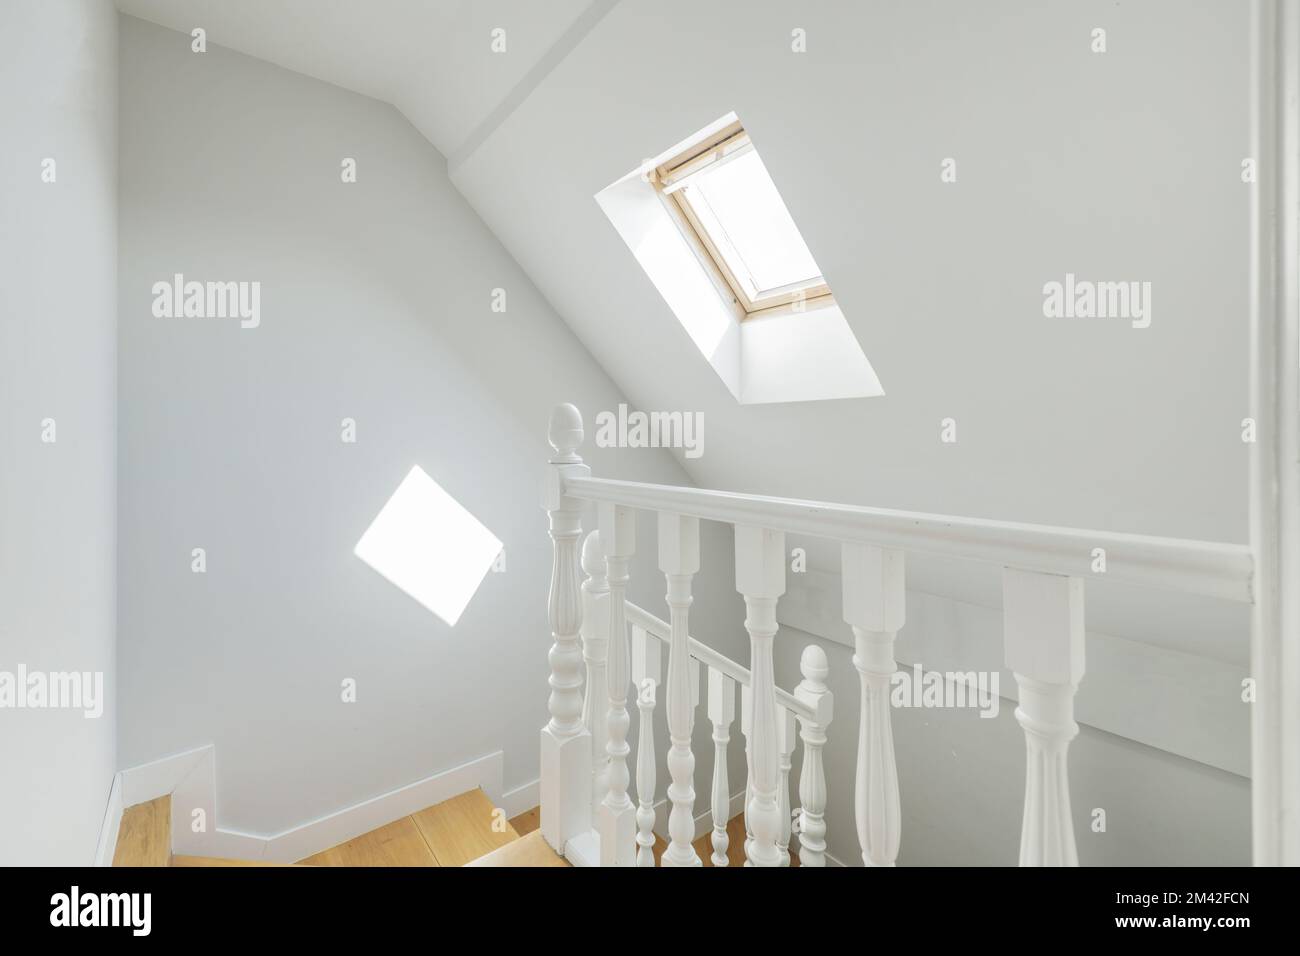 White painted wooden balustrade on the stairs of an attic with sloped ceilings and skylights with curtains Stock Photo